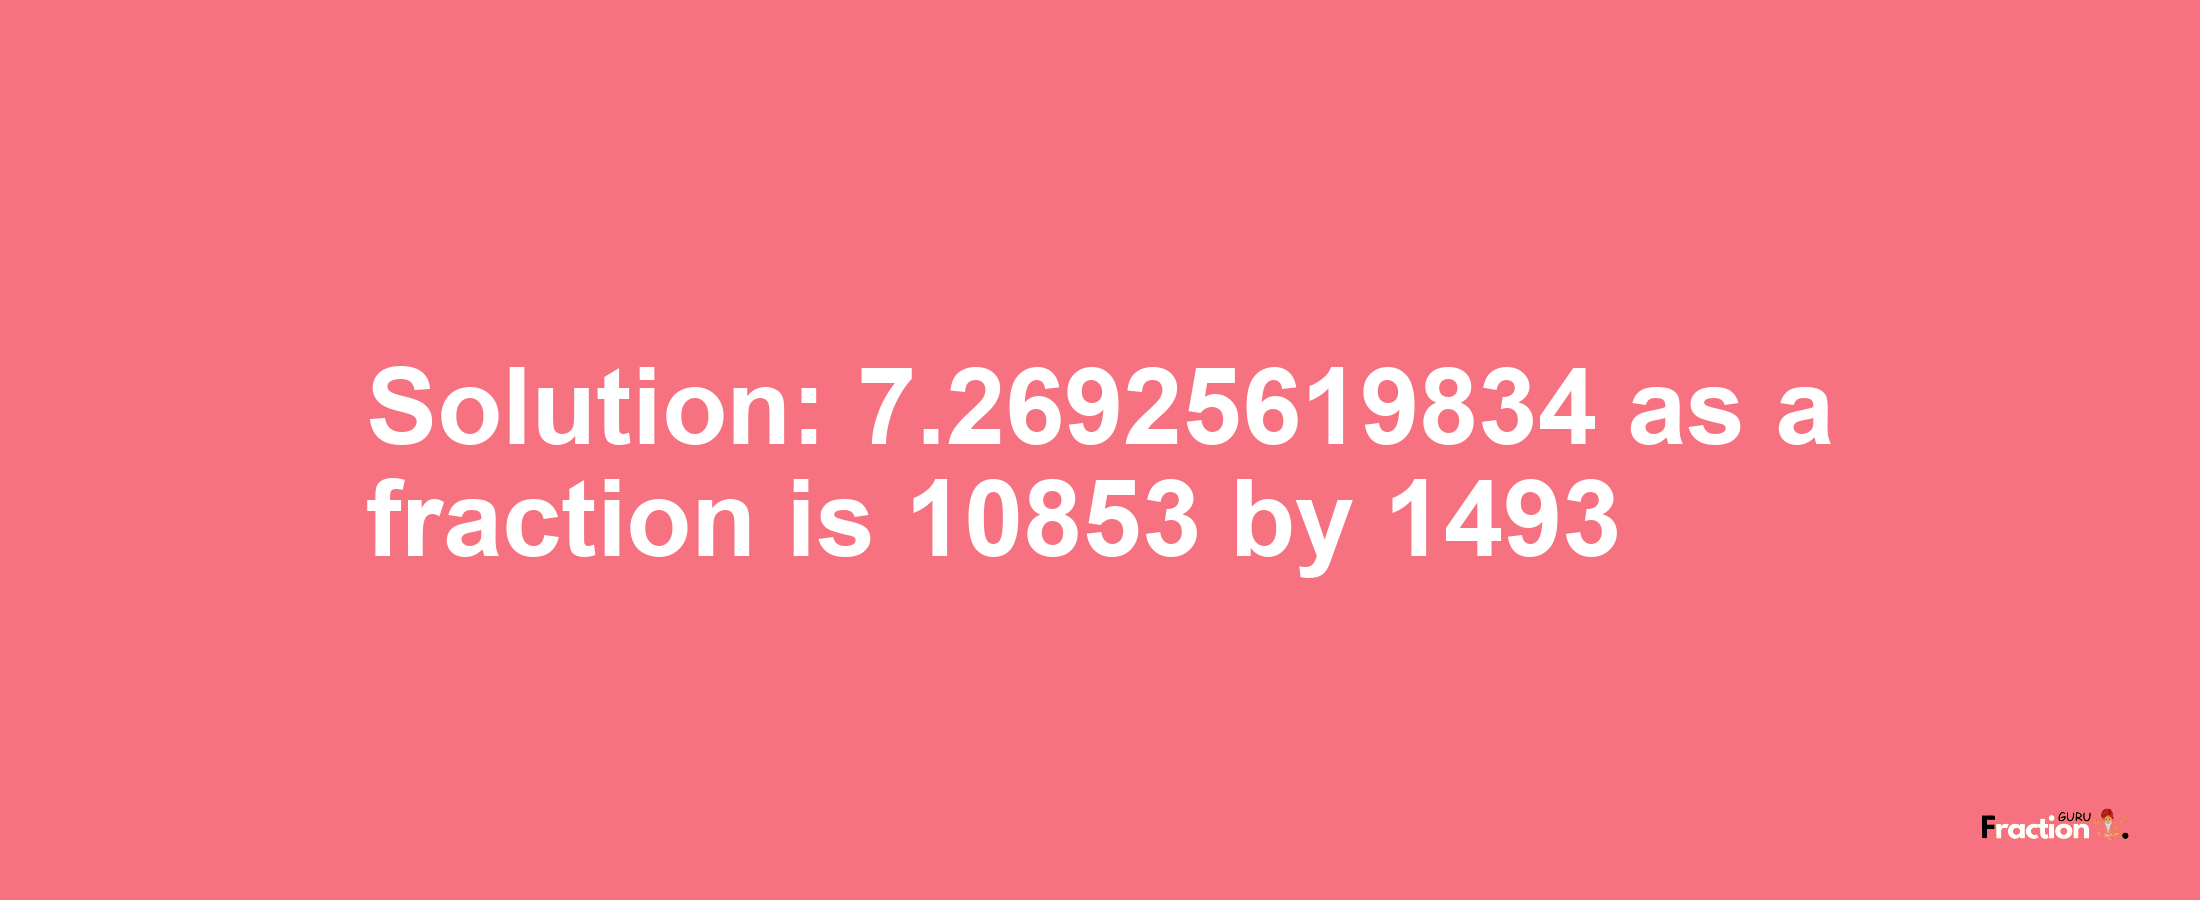 Solution:7.26925619834 as a fraction is 10853/1493